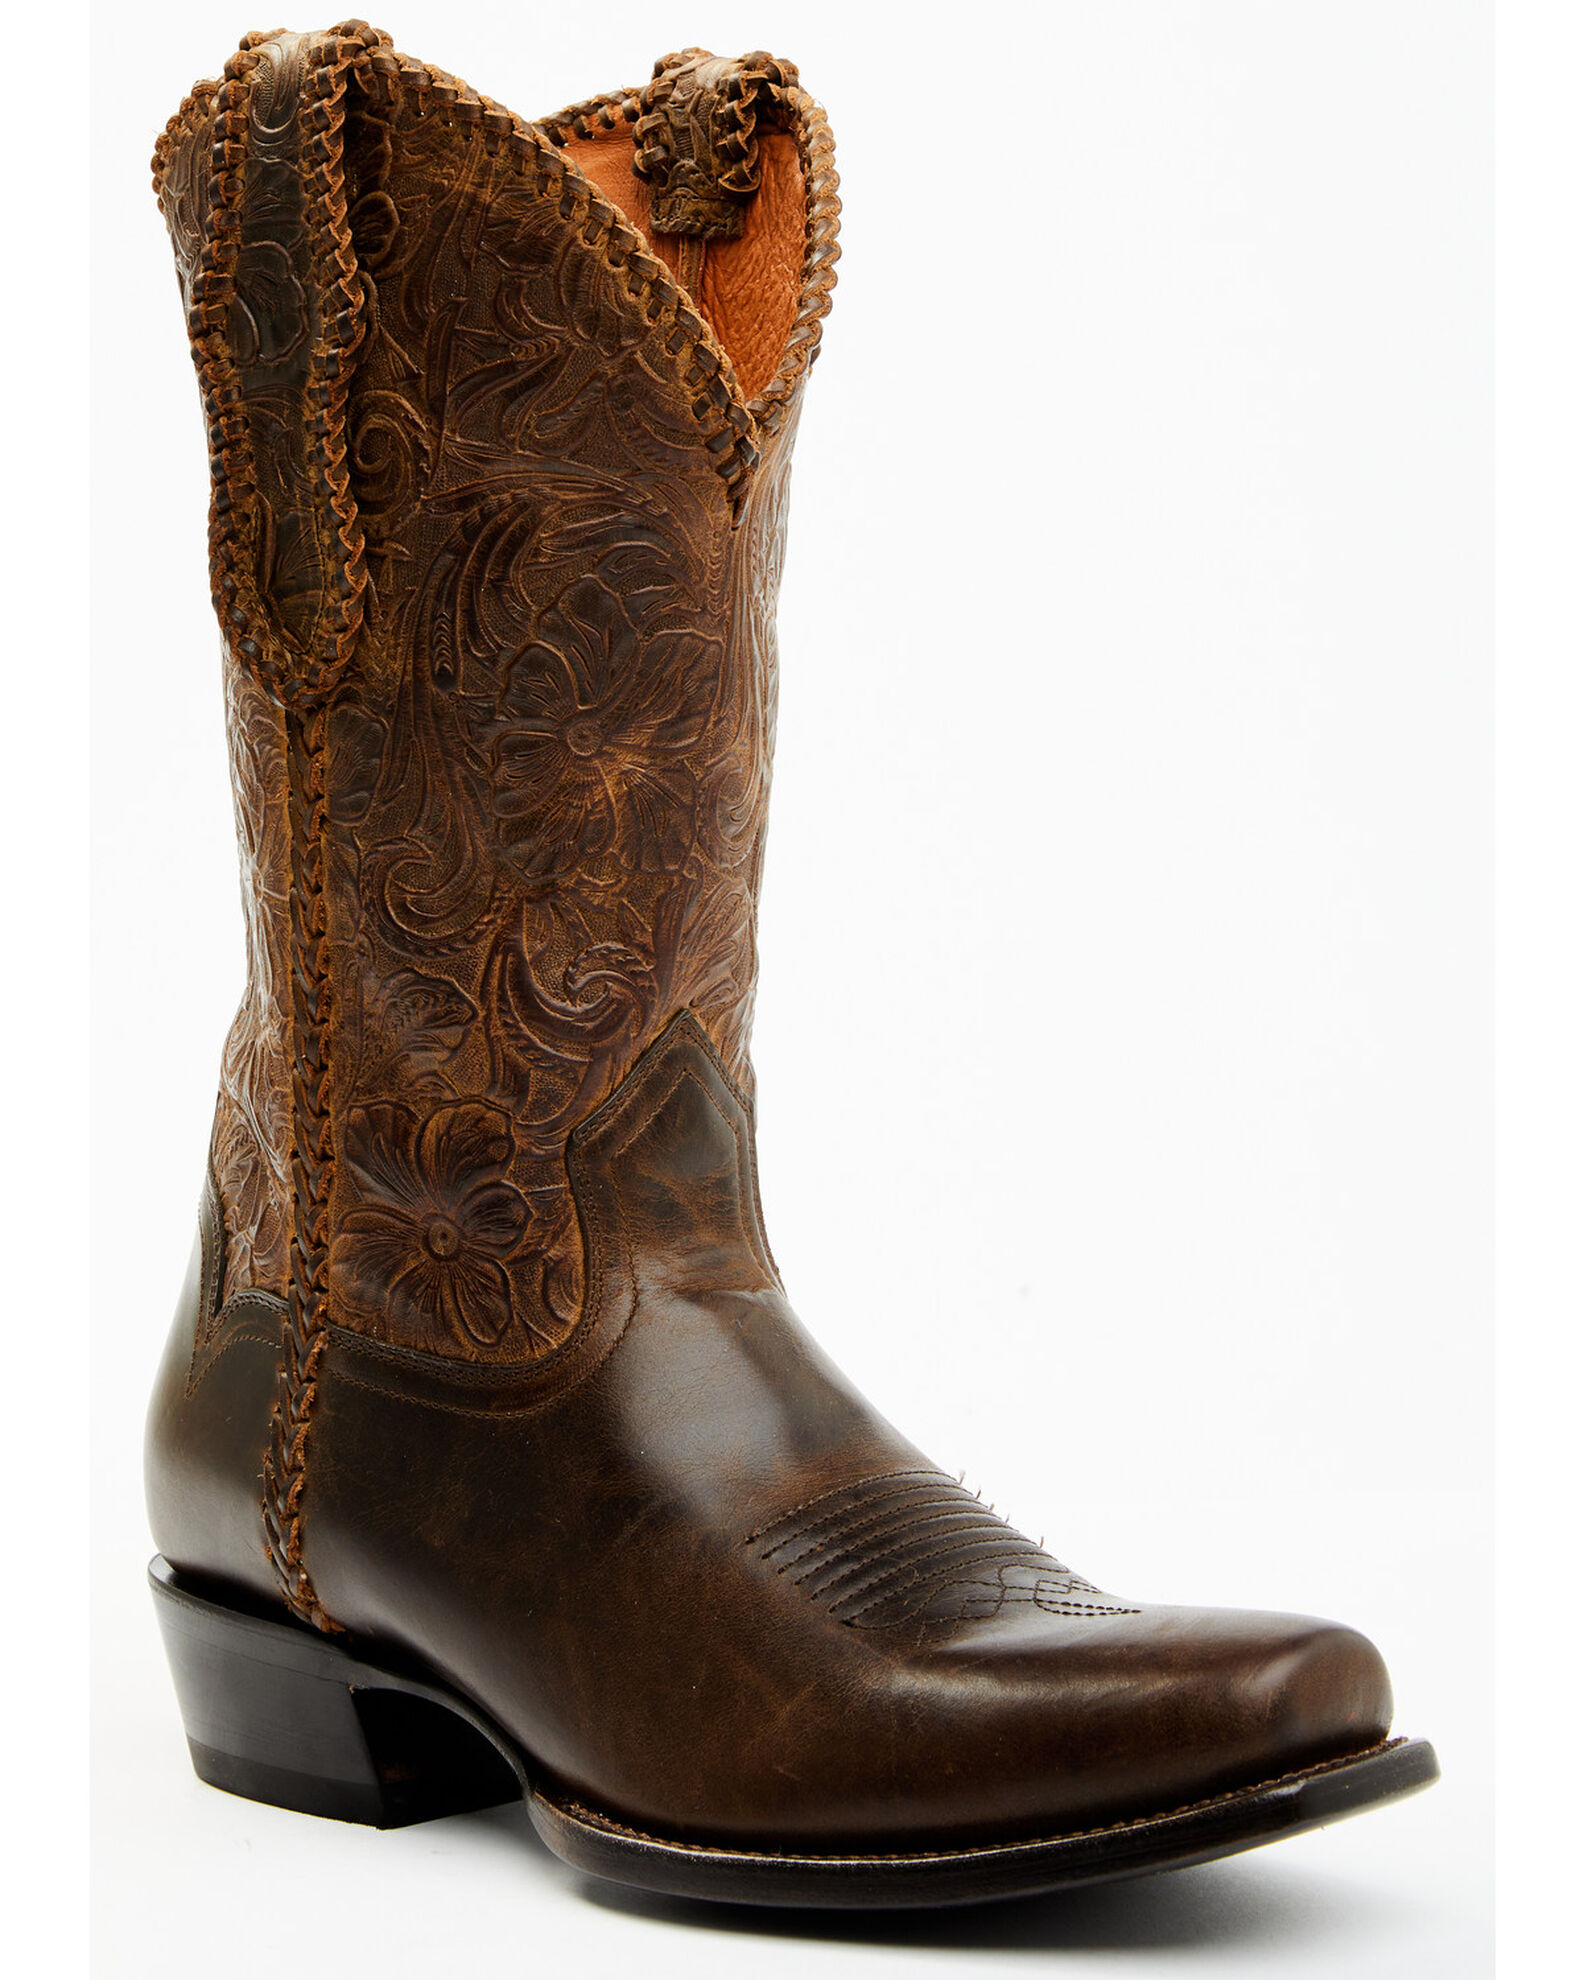 Moonshine Spirit Men's Pancho Tooled Western Boots - Square Toe